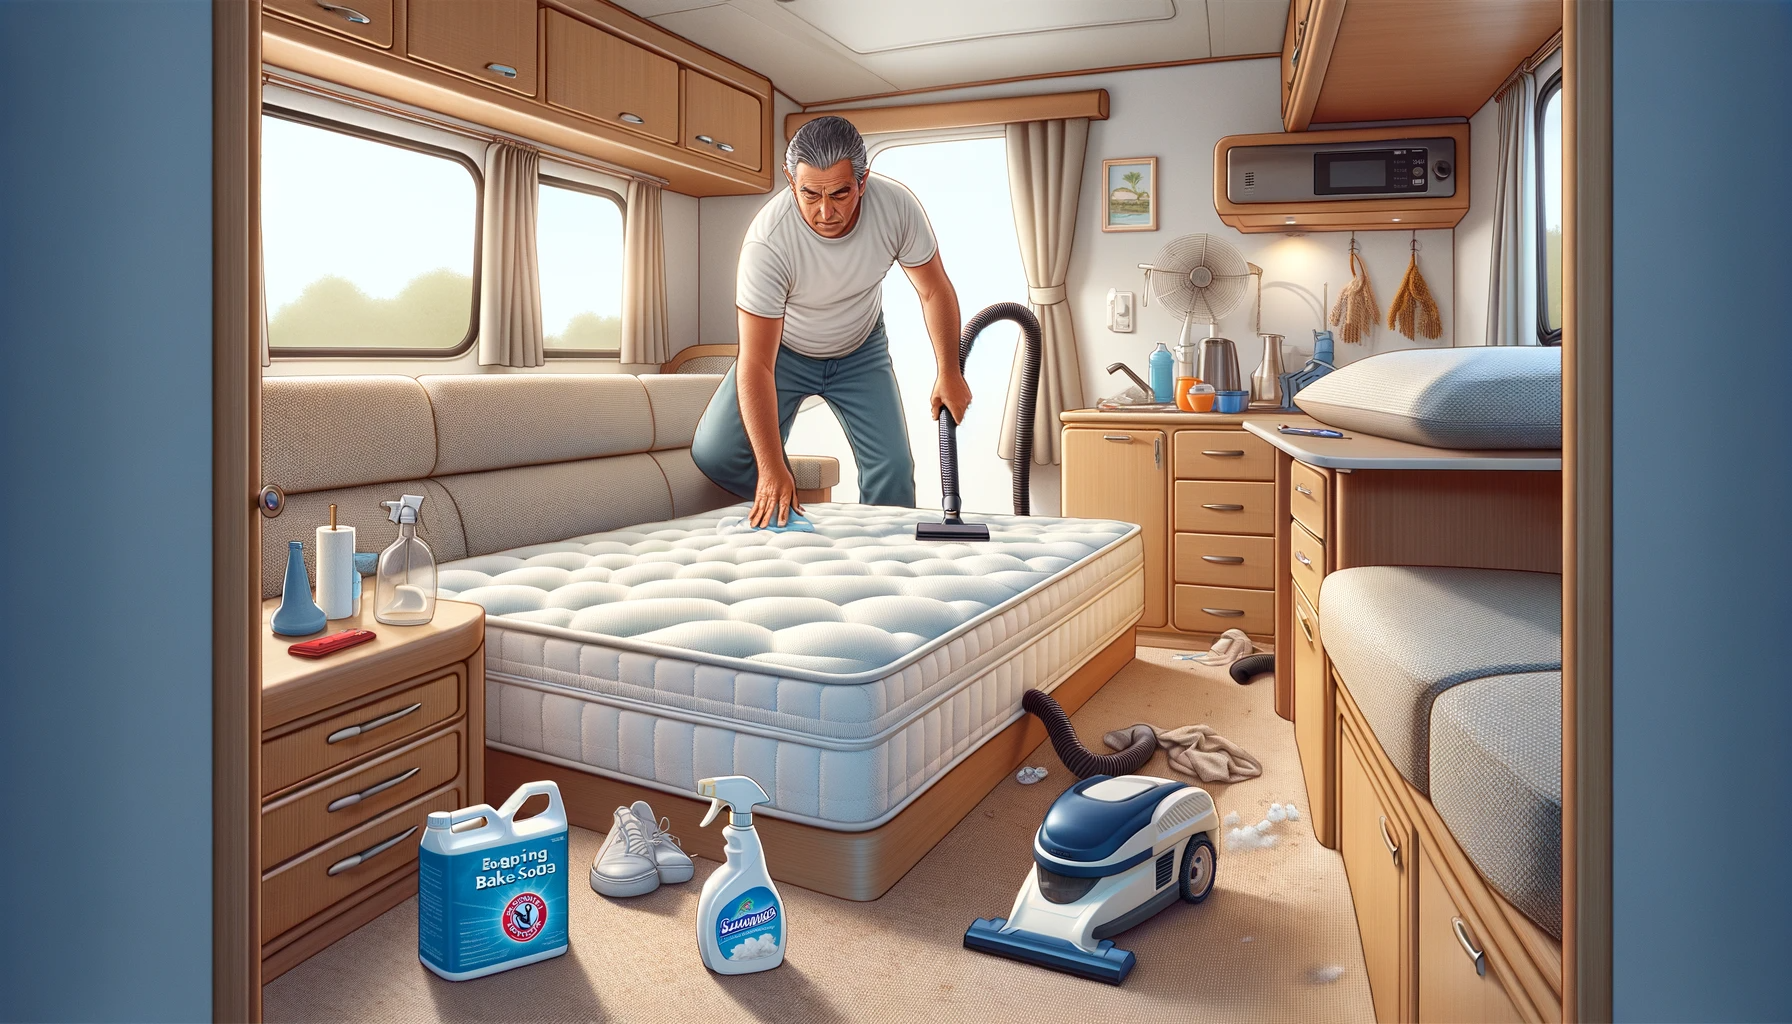 The visual illustrates a person in a caravan setting, engaged in maintenance tasks to keep the mattress topper clean and hygienic, emphasizing the importance of routine care for a comfortable travel experience.